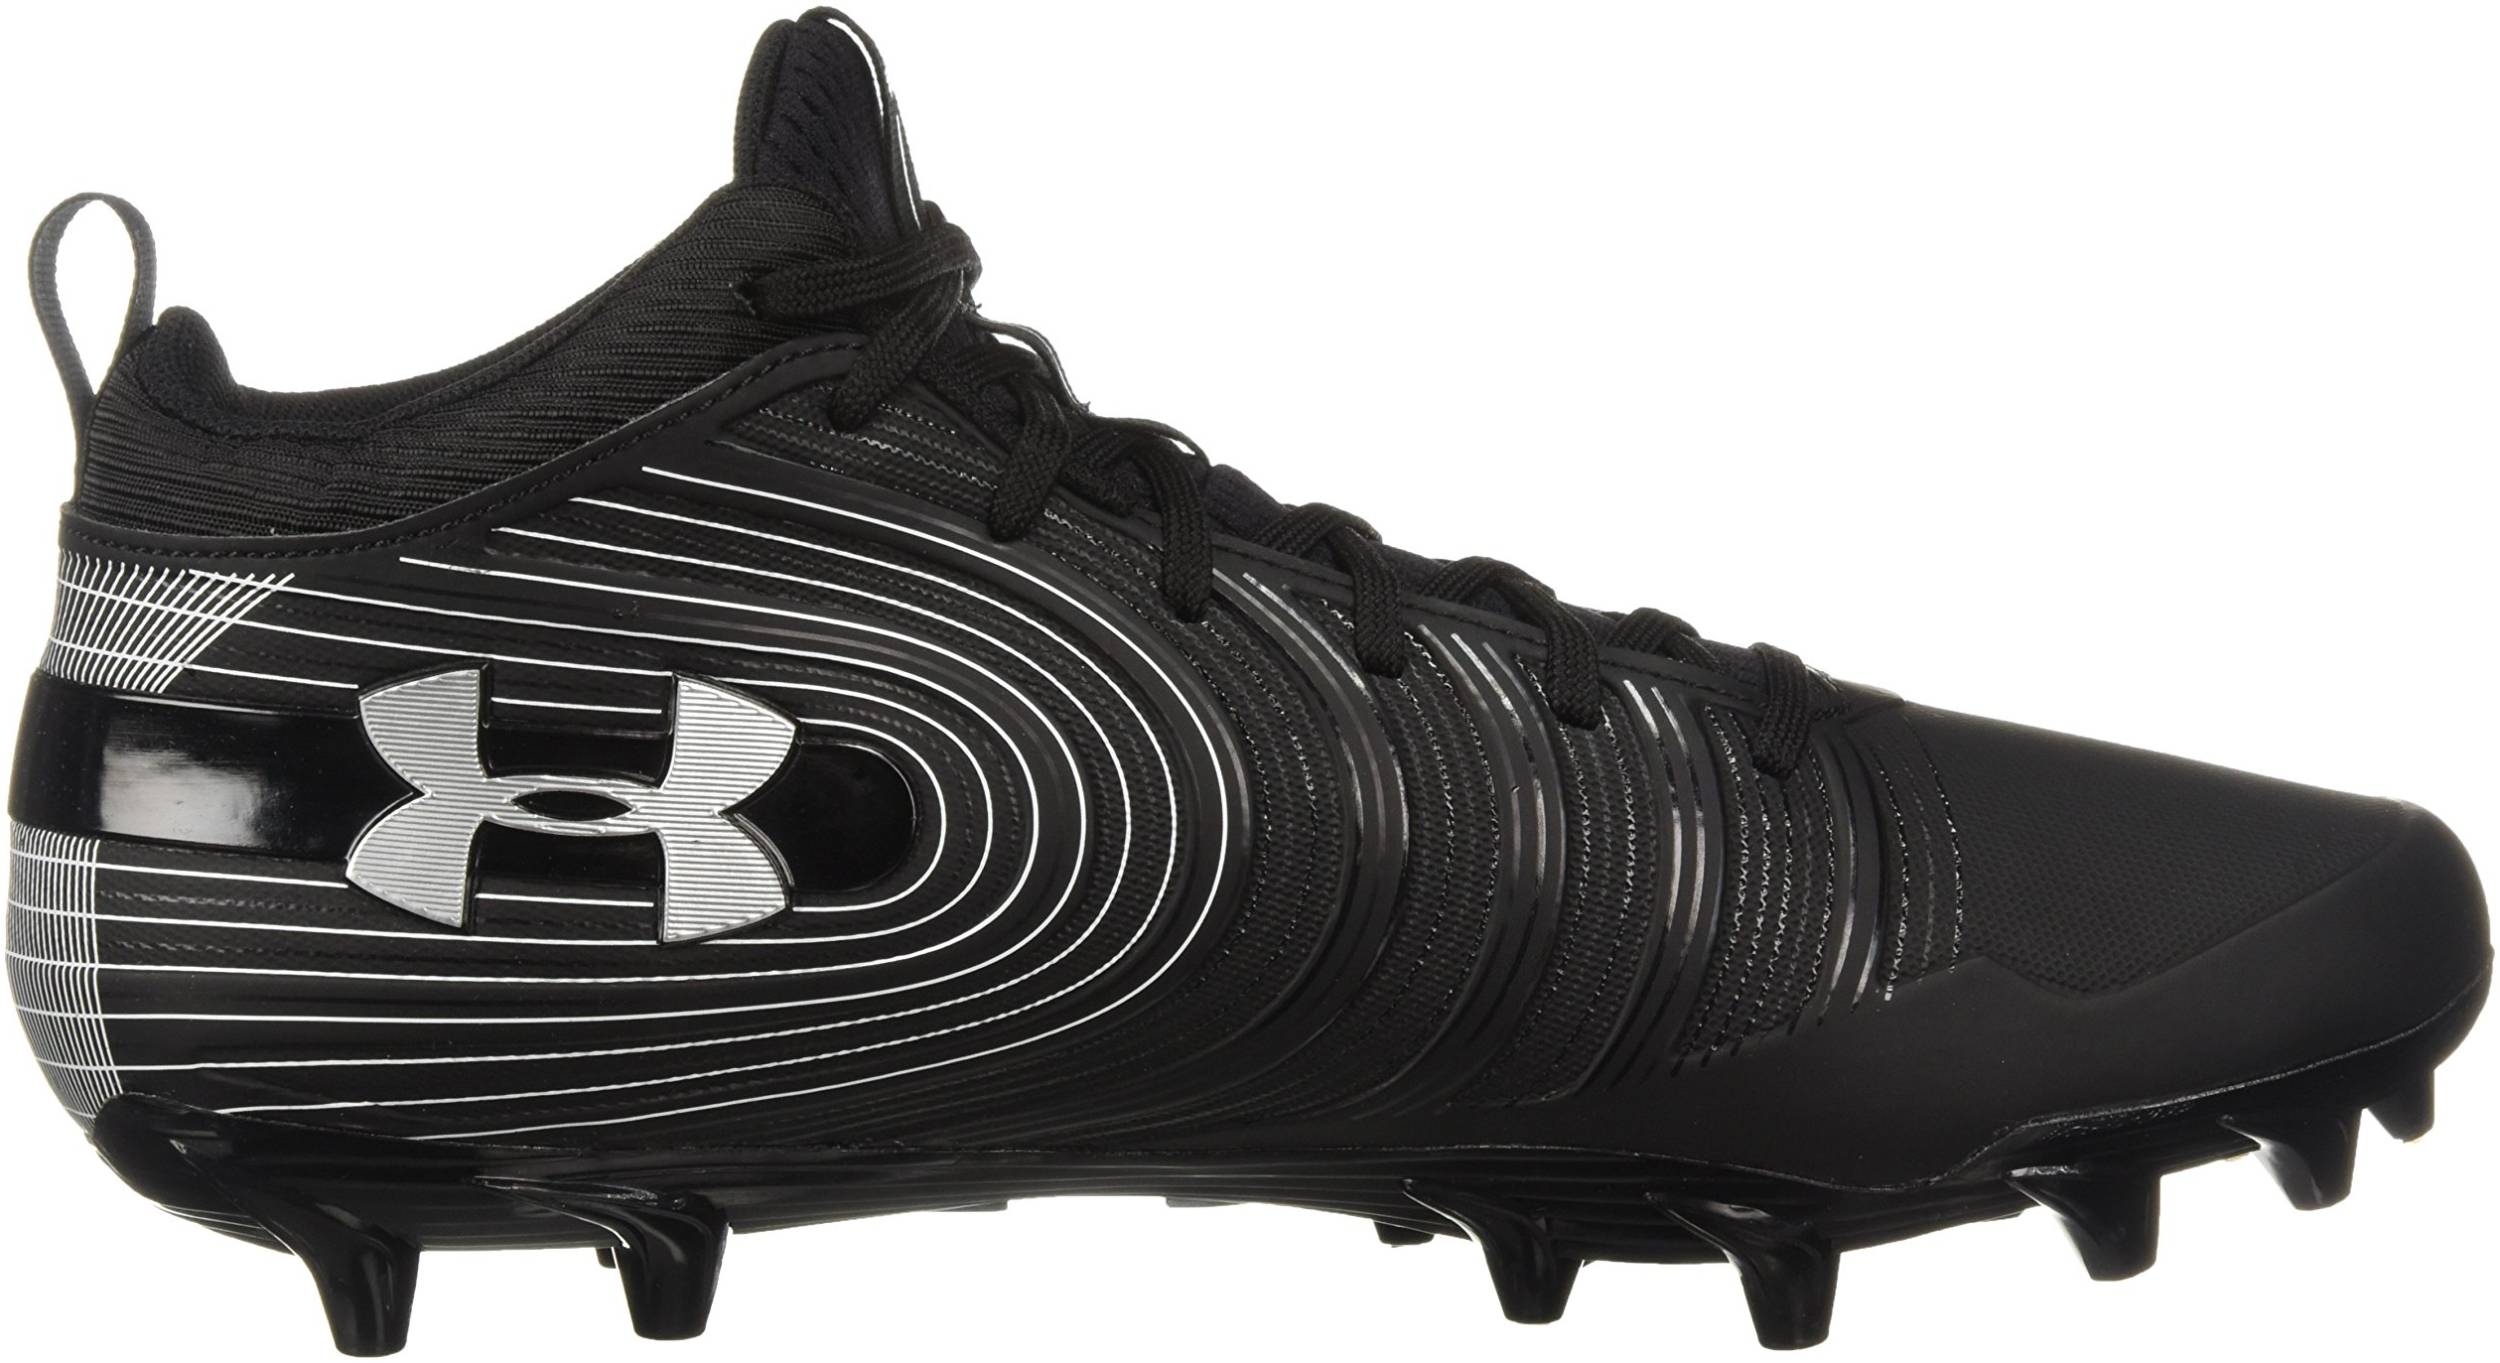 Under Armour High Select 13.0 Wide Size Football Cleats 